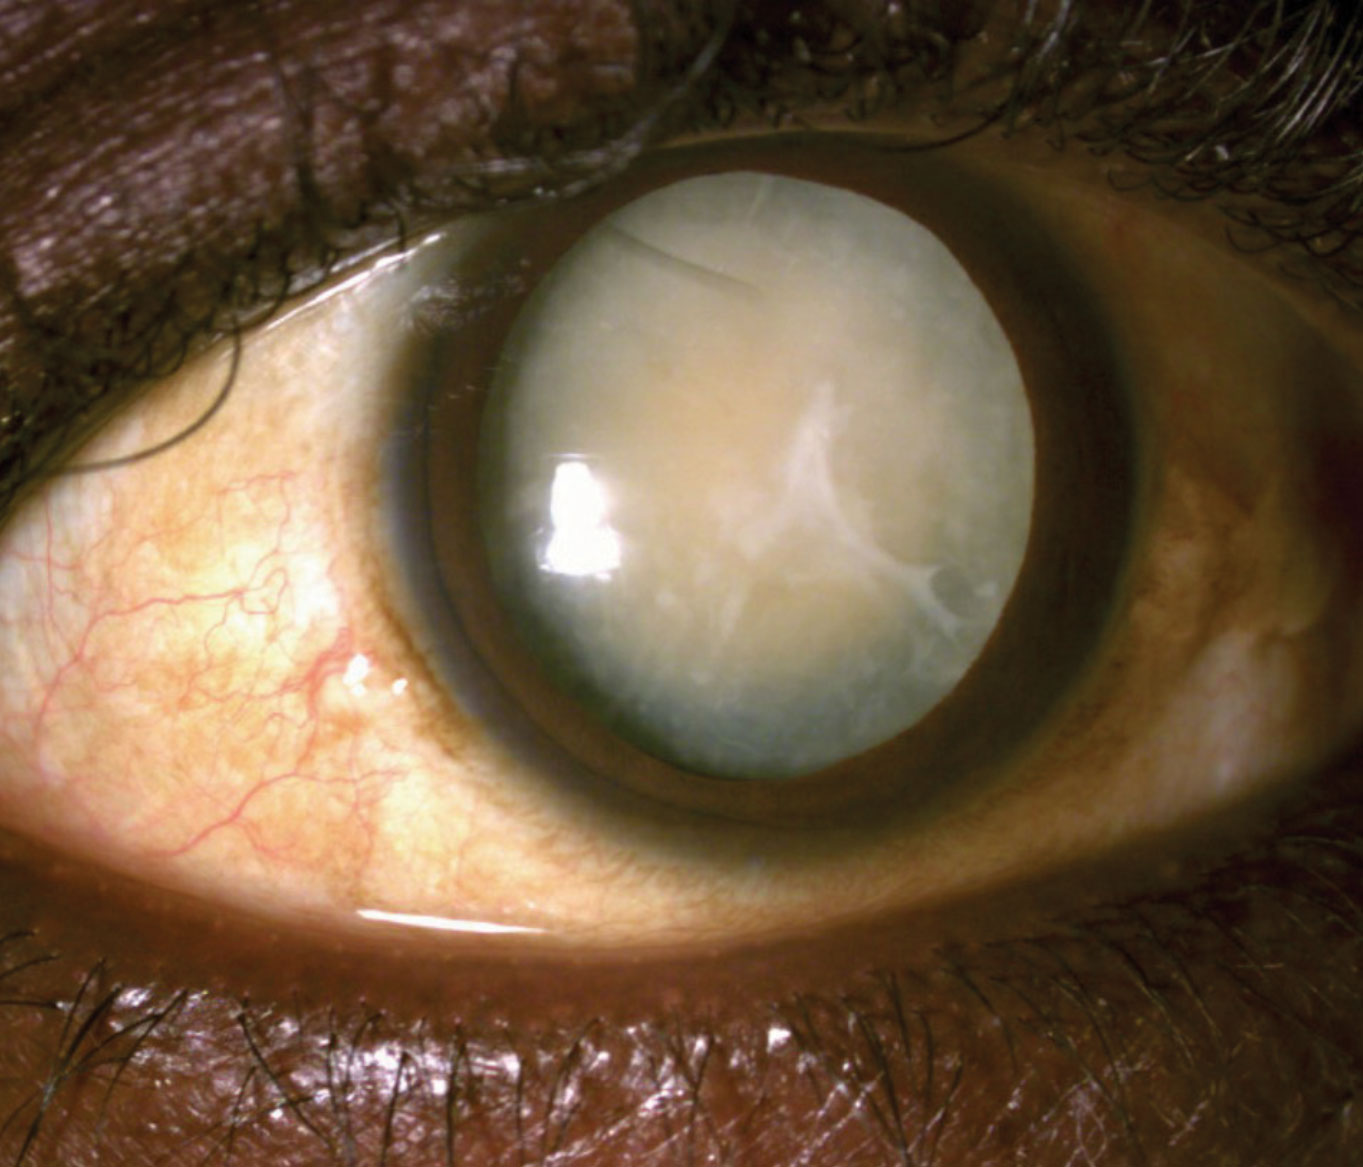 This 53-year-old patient’s left eye’s vision was reduced to light perception as a result of this hypermature cataract.